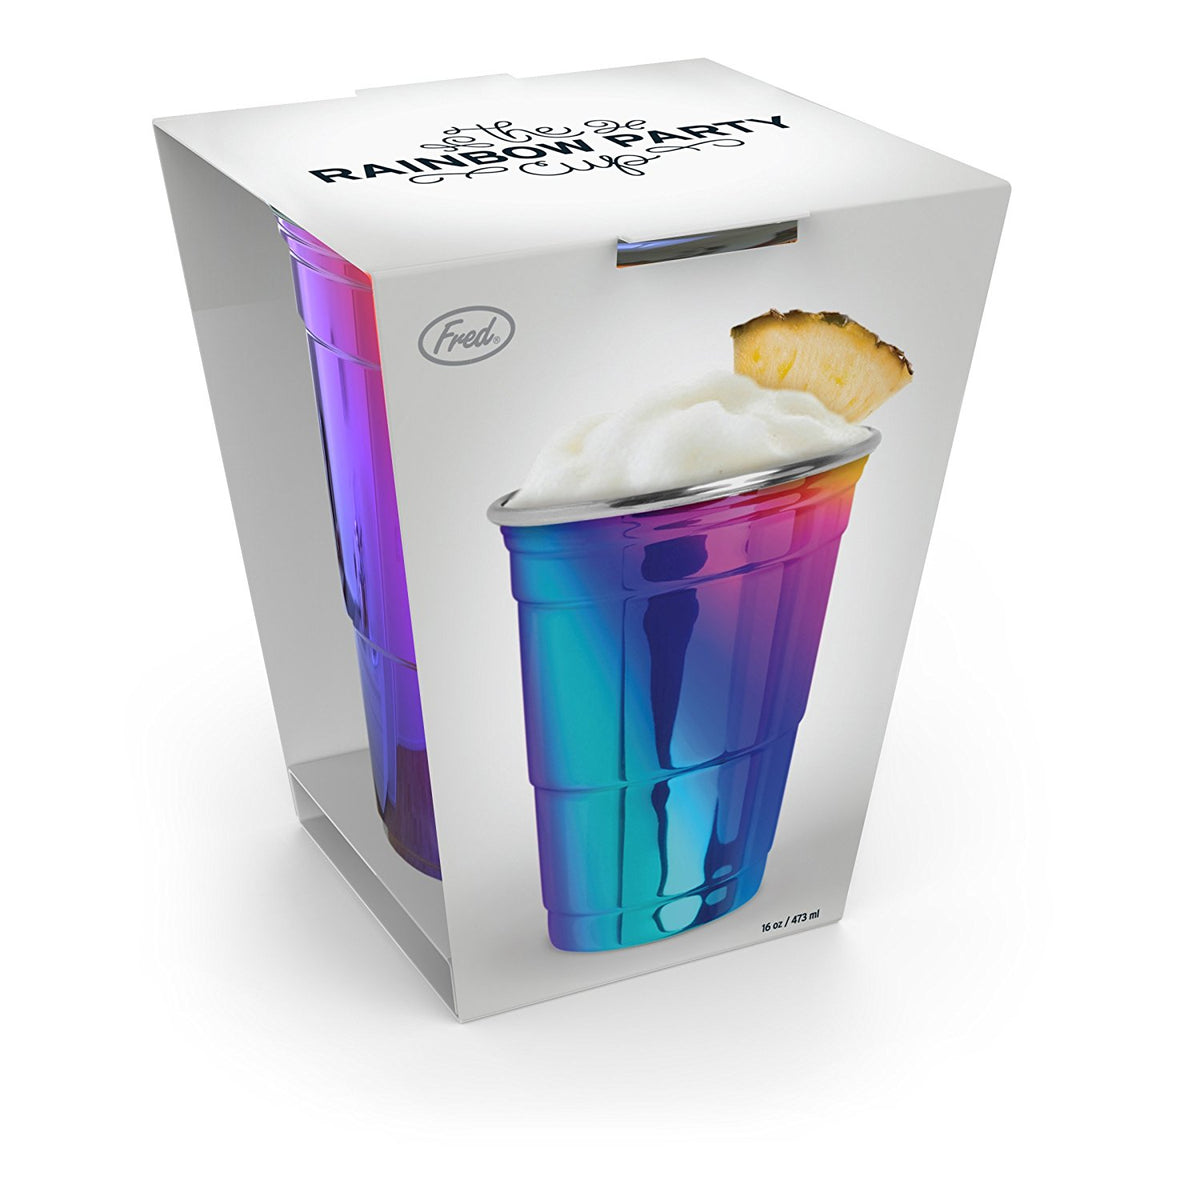 PartyRainbow™ - Premium Rainbow Iridescent Stainless Steel Party Cup